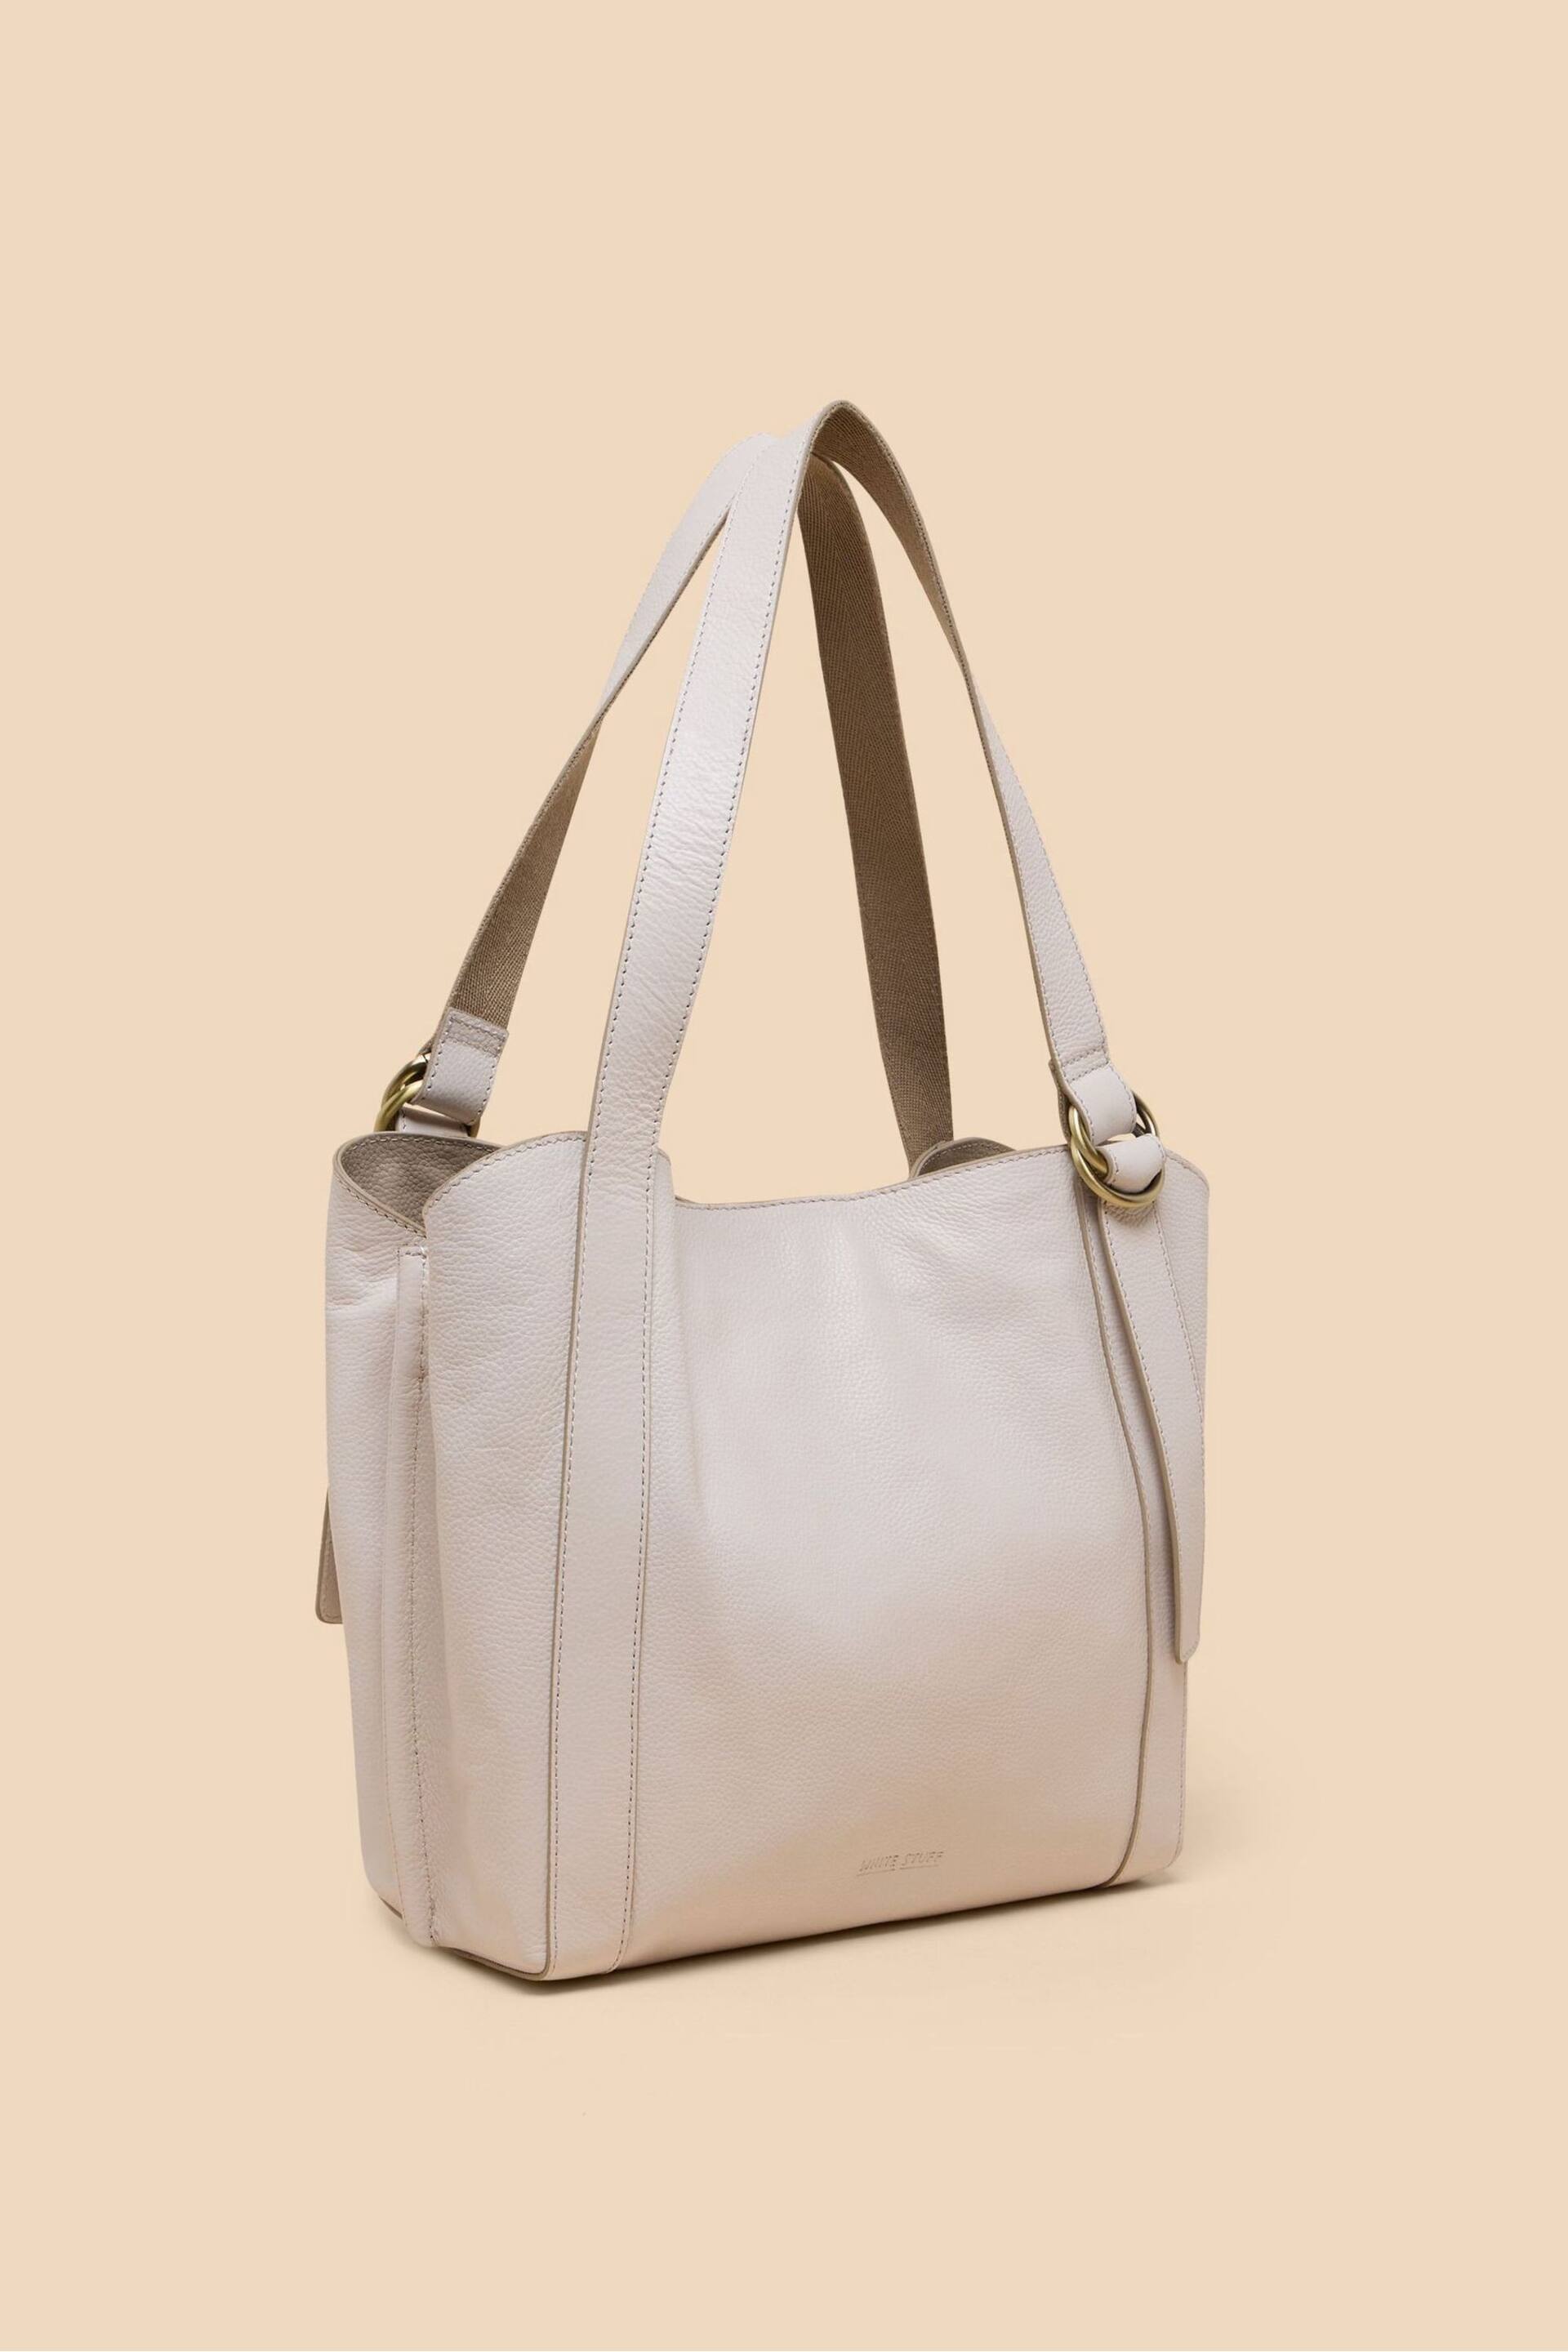 White Stuff White Leather Hannah Tote Bag - Image 2 of 4